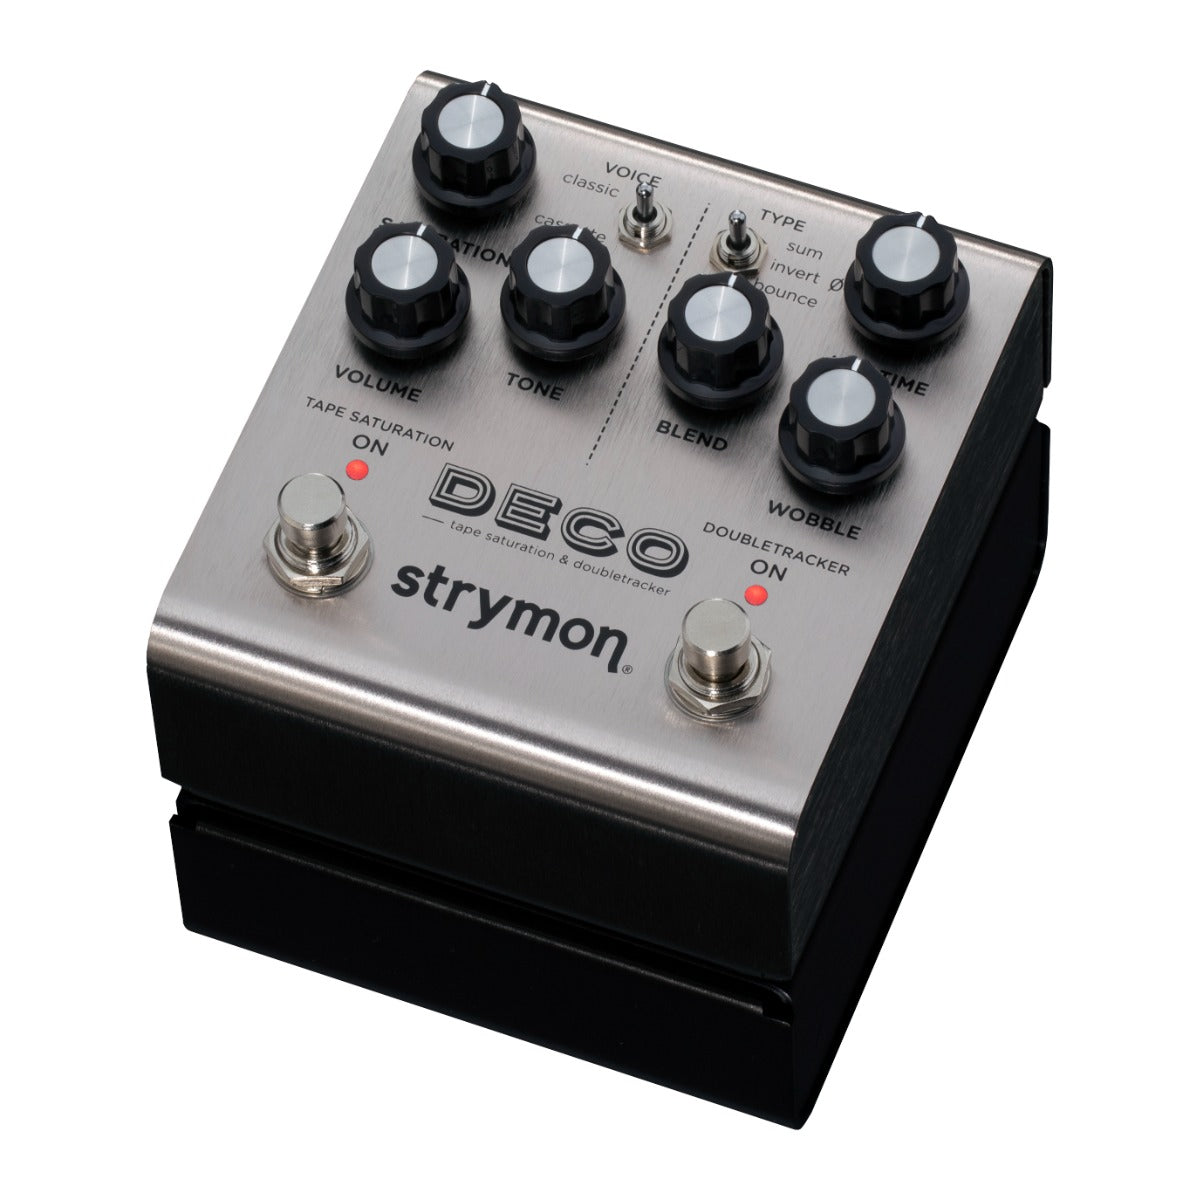 Strymon Deco V2 Tape Saturation and Doubletracker Pedal, View 3